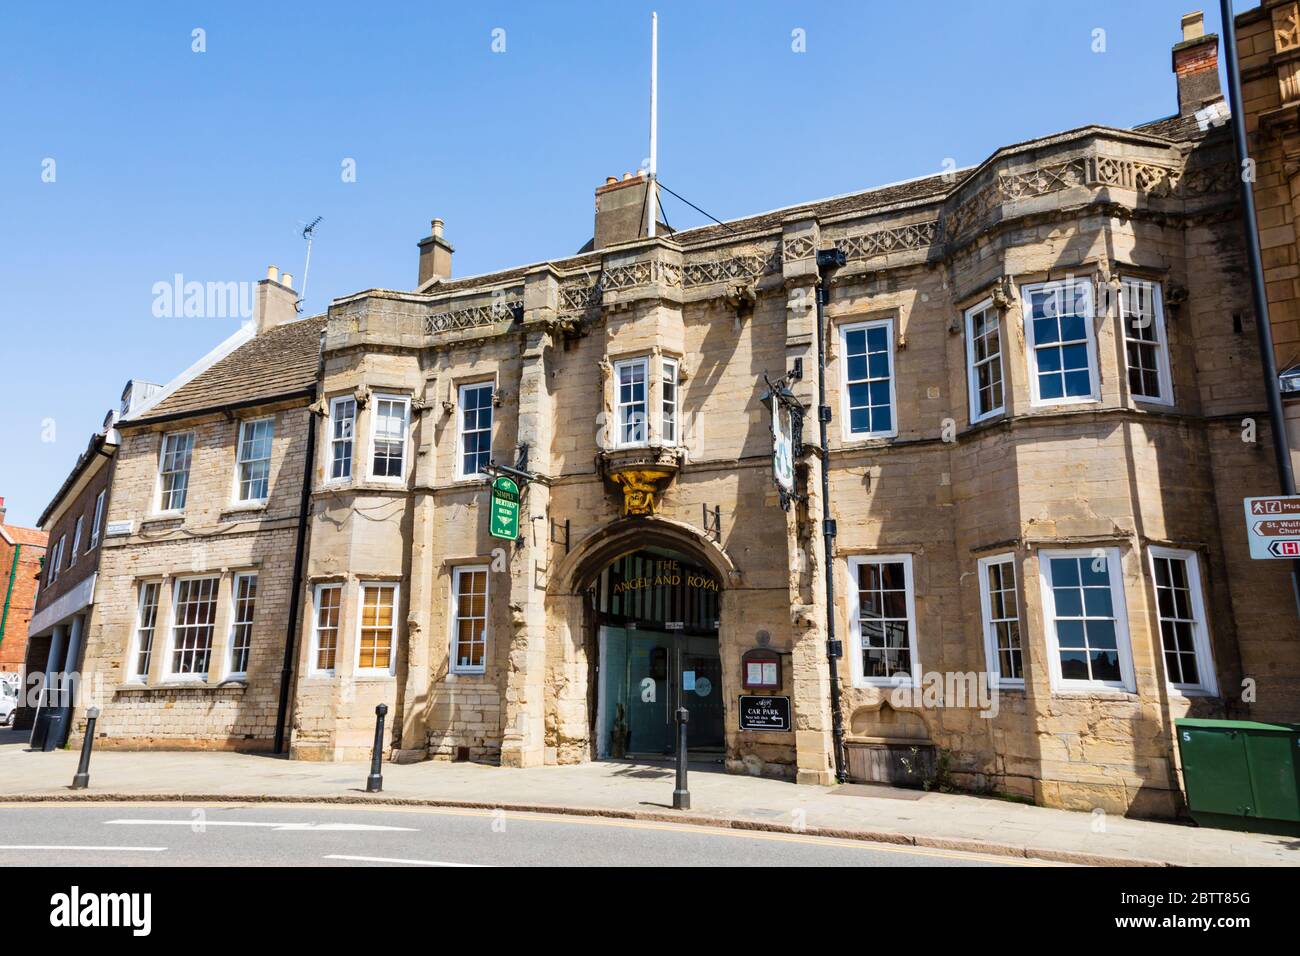 The Angel and Royal hotel. Old coaching inn on the Great North road, Grantham, Lincolnshire, England. May 2020 Stock Photo